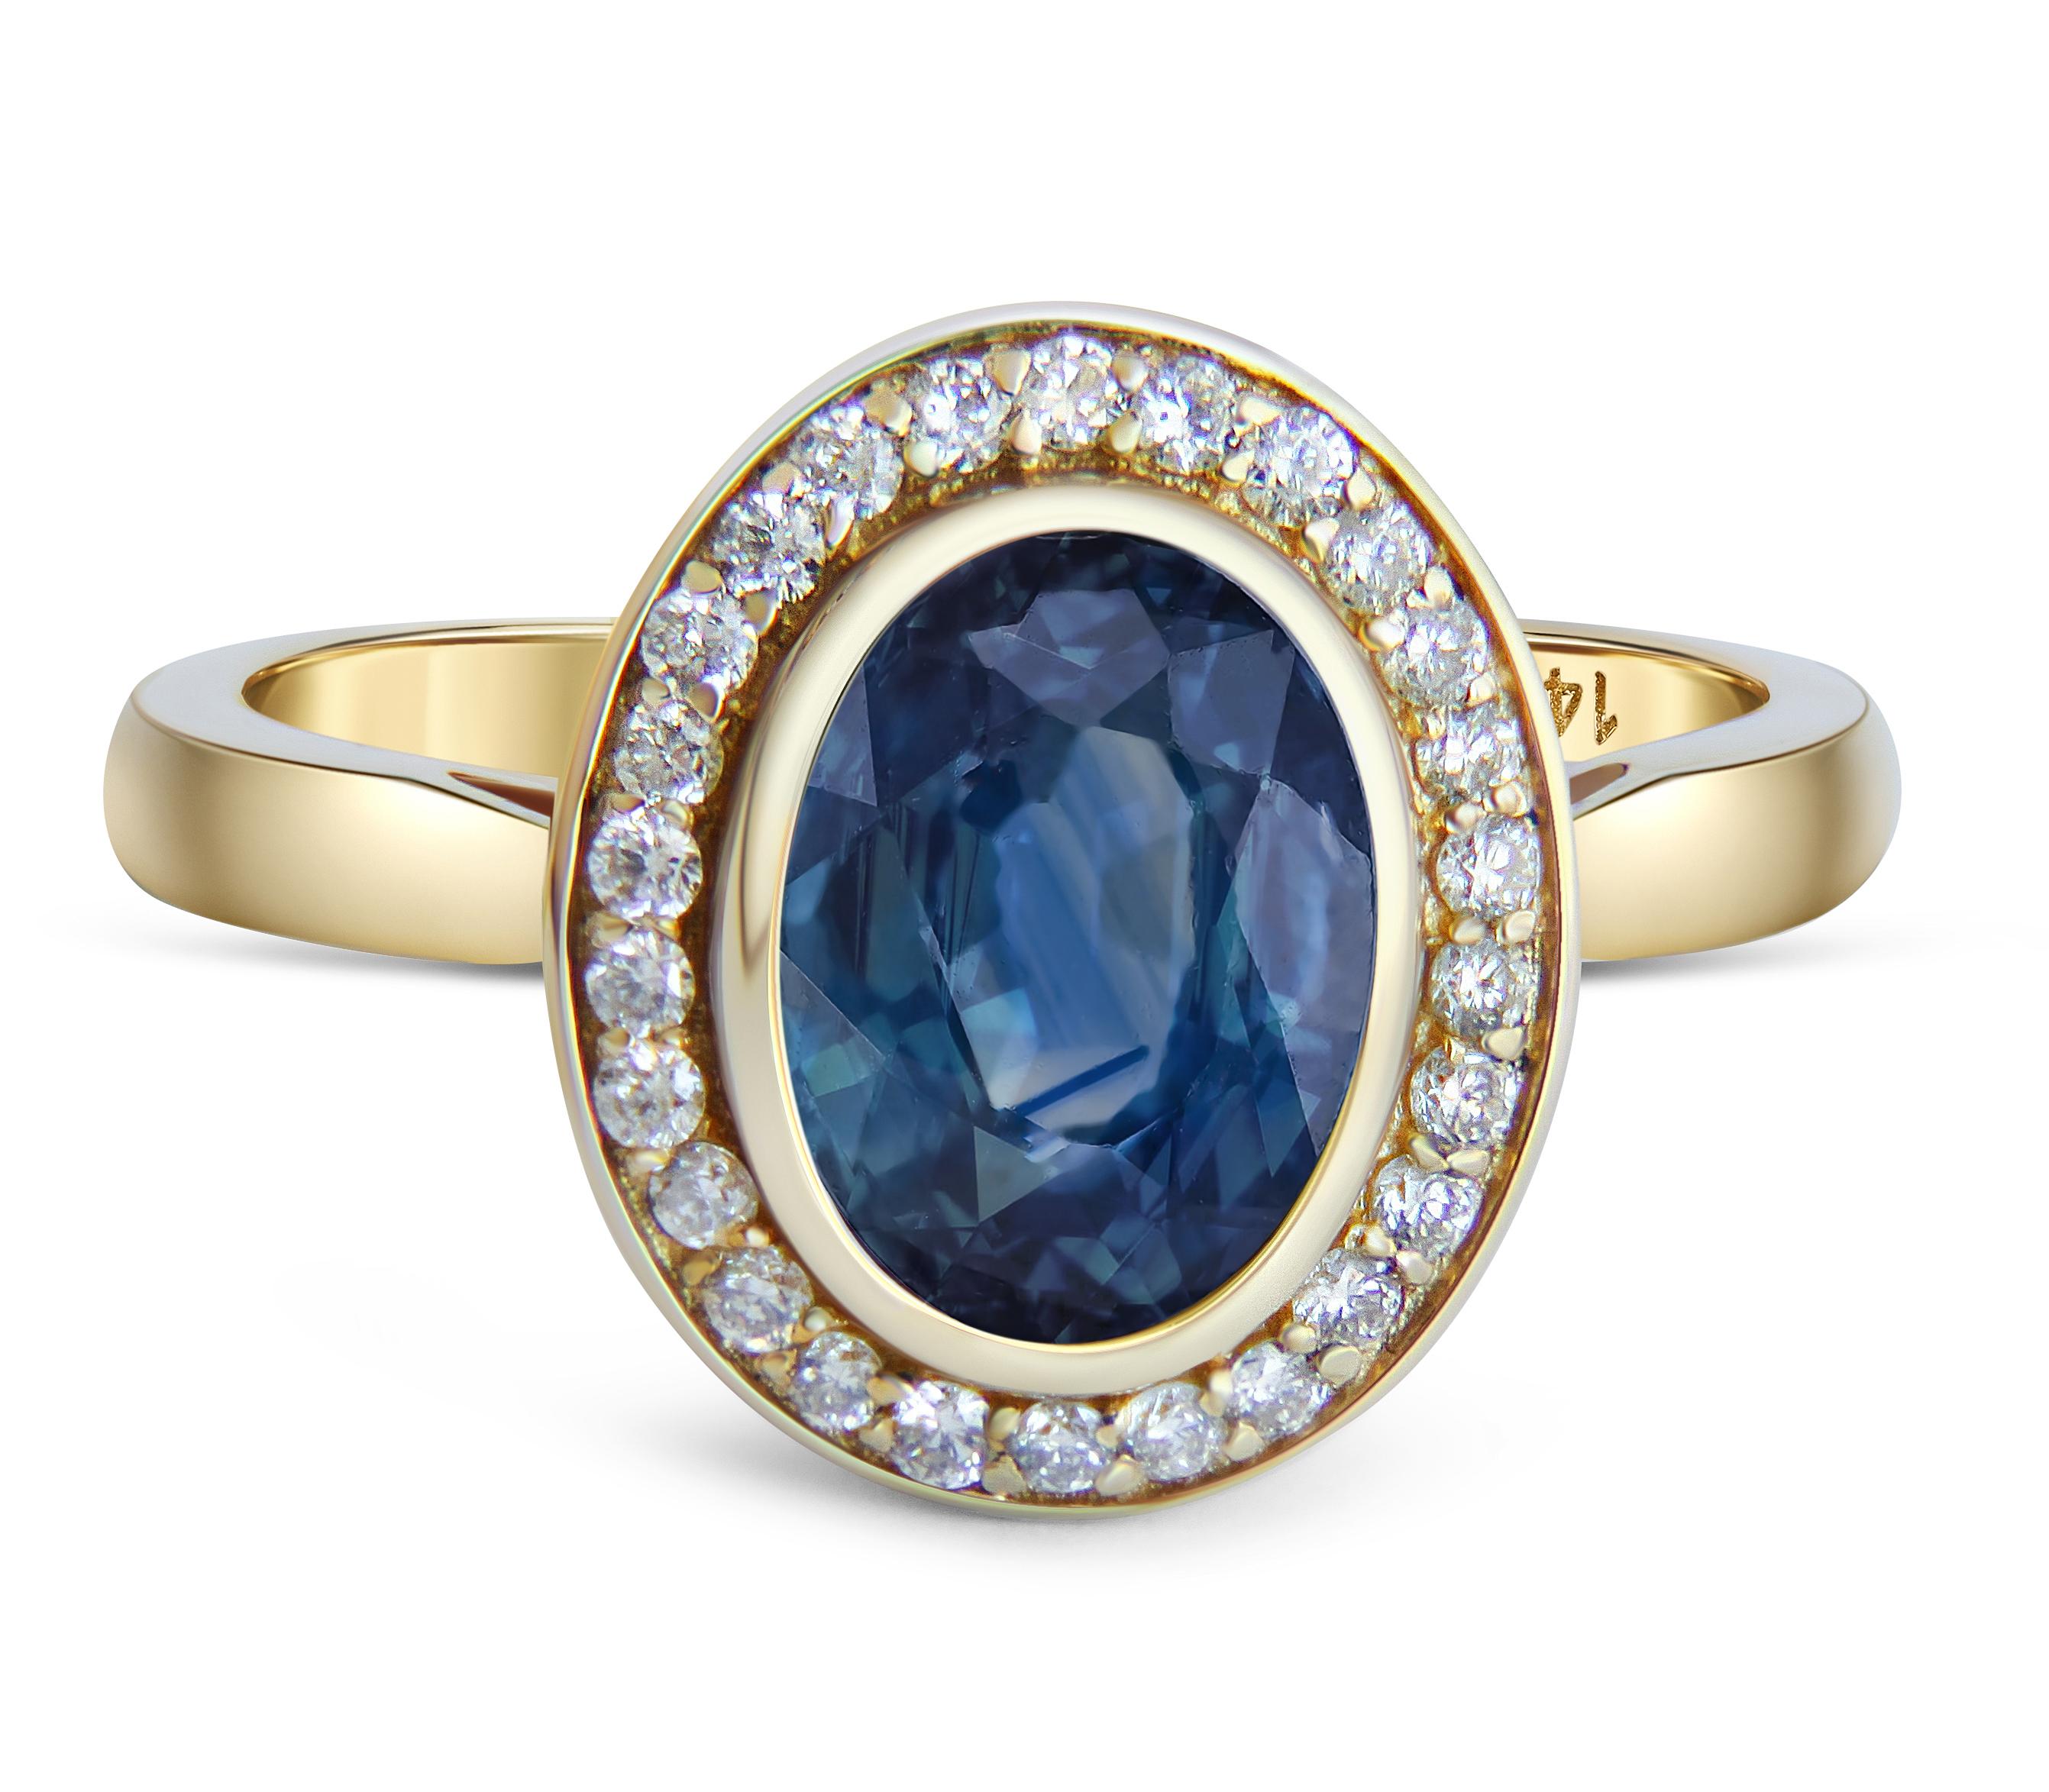 Sapphire and diamonds 14k gold ring. 
Oval Sapphire gold ring. Sapphire diamond halo ring. Blue gemstone ring. September birthstone ring.

Metal: 14k gold
Weight: 3 gr depends from size

Gemstones:
Sapphire - 1 piece
Cut - oval
Color - blue
Weight -